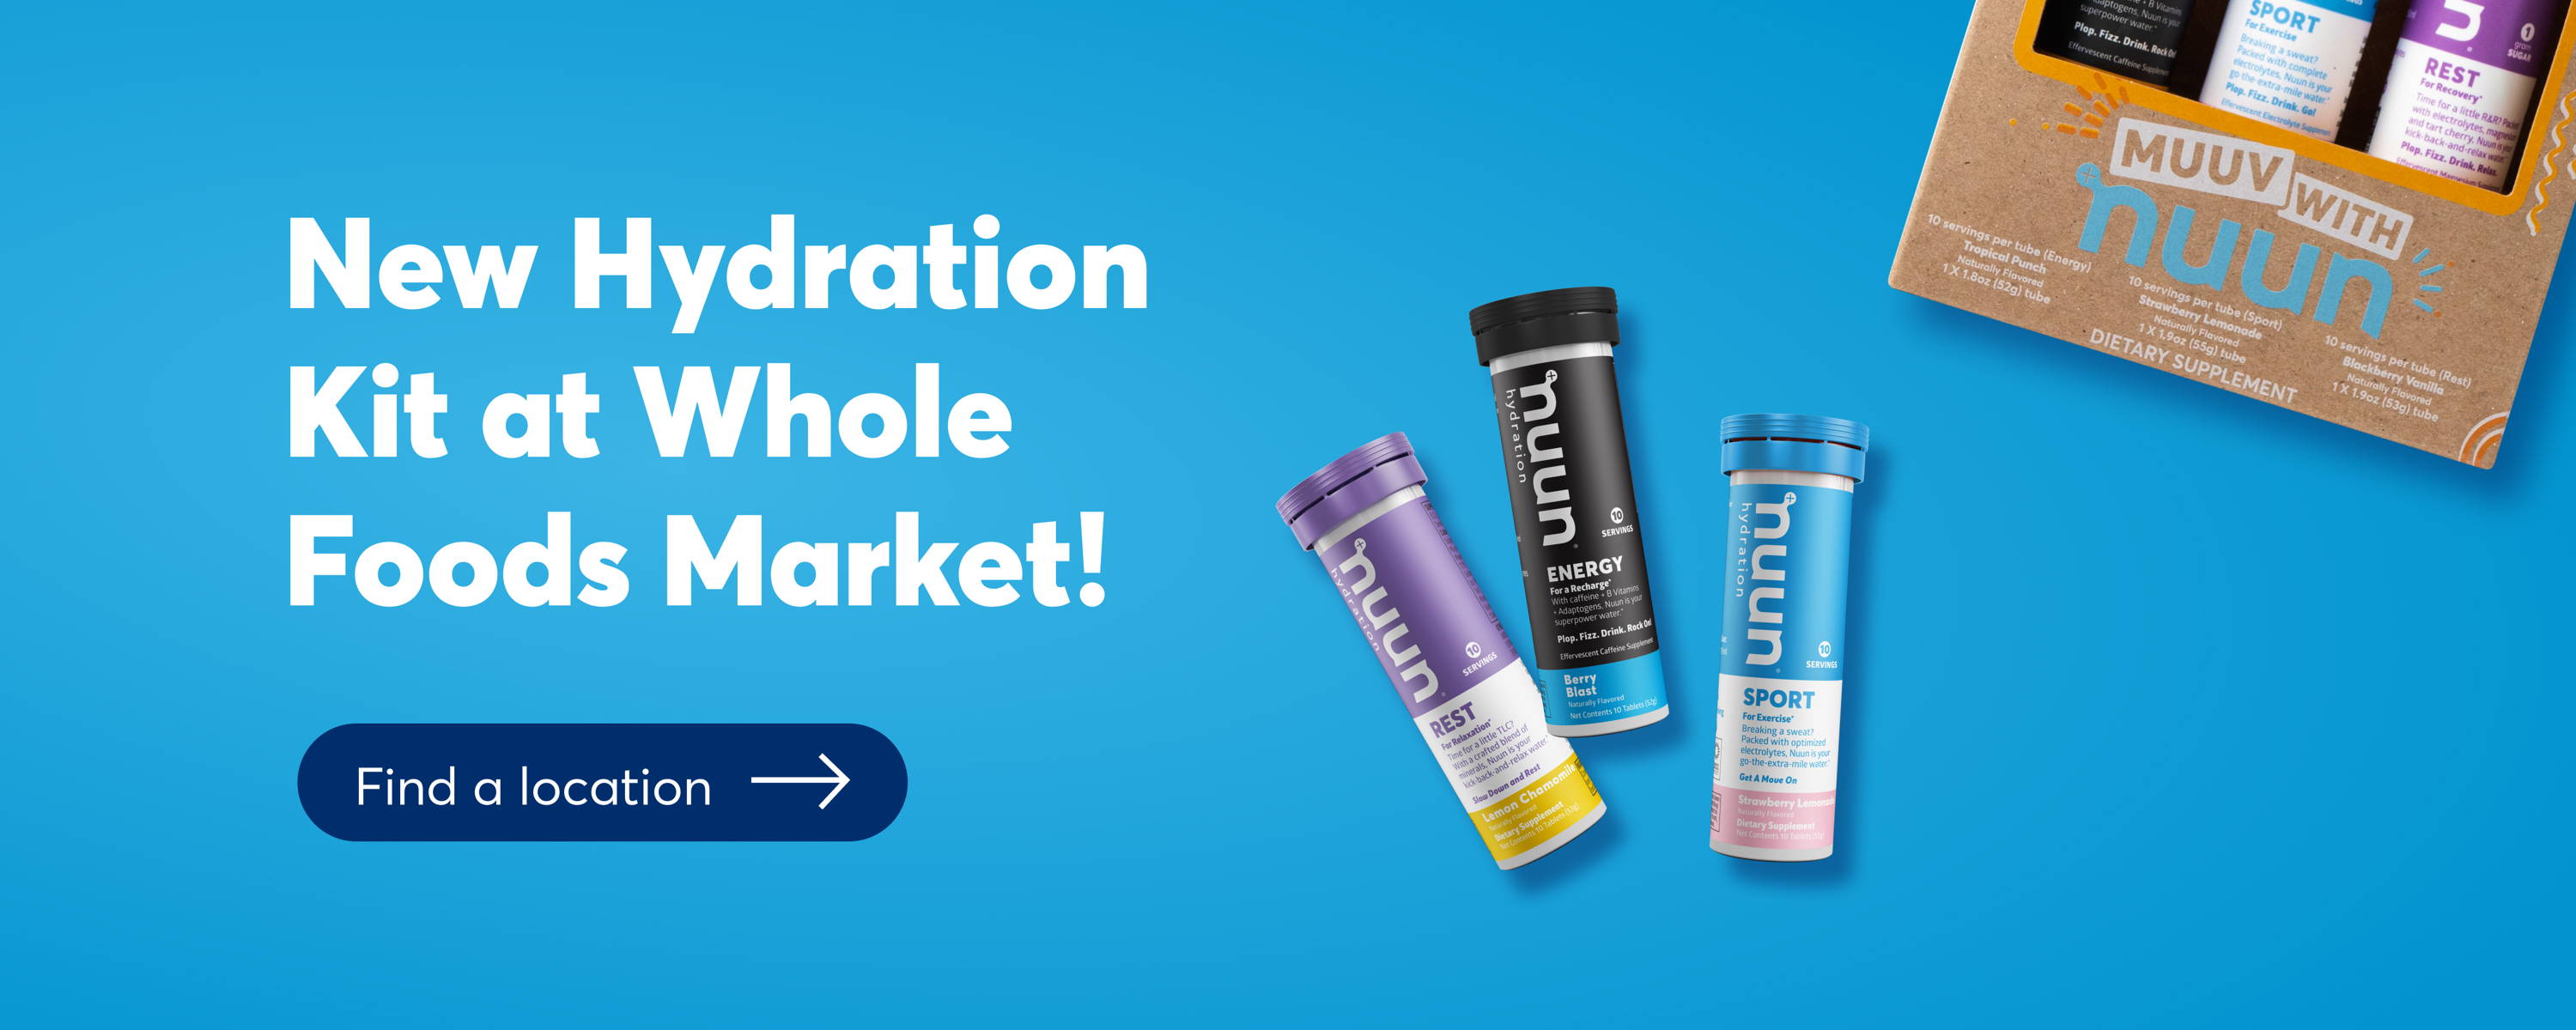 New Hydration Kit at Whole Foods Market! Find a location